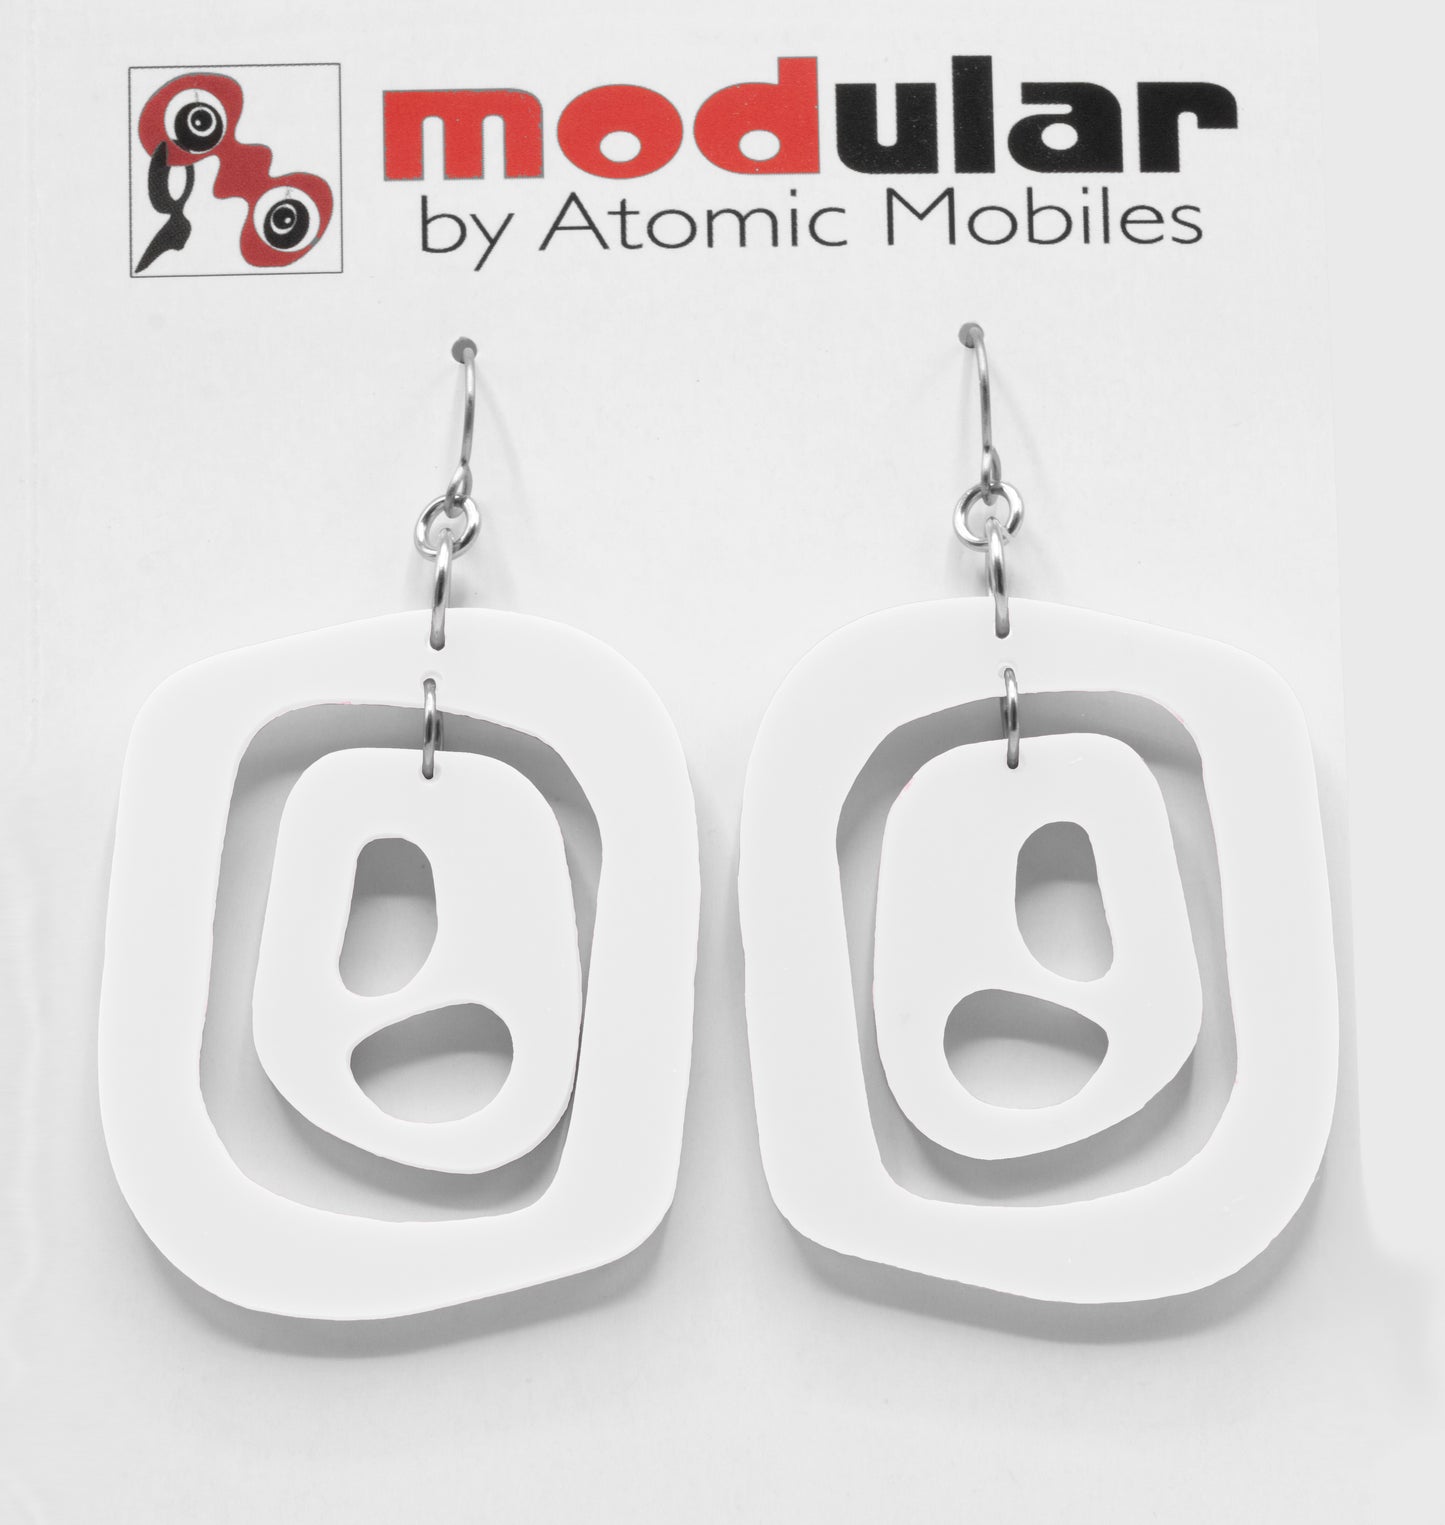 MODular Earrings - Mid 20th Statement Earrings in White by AtomicMobiles.com - retro era mod handmade jewelry